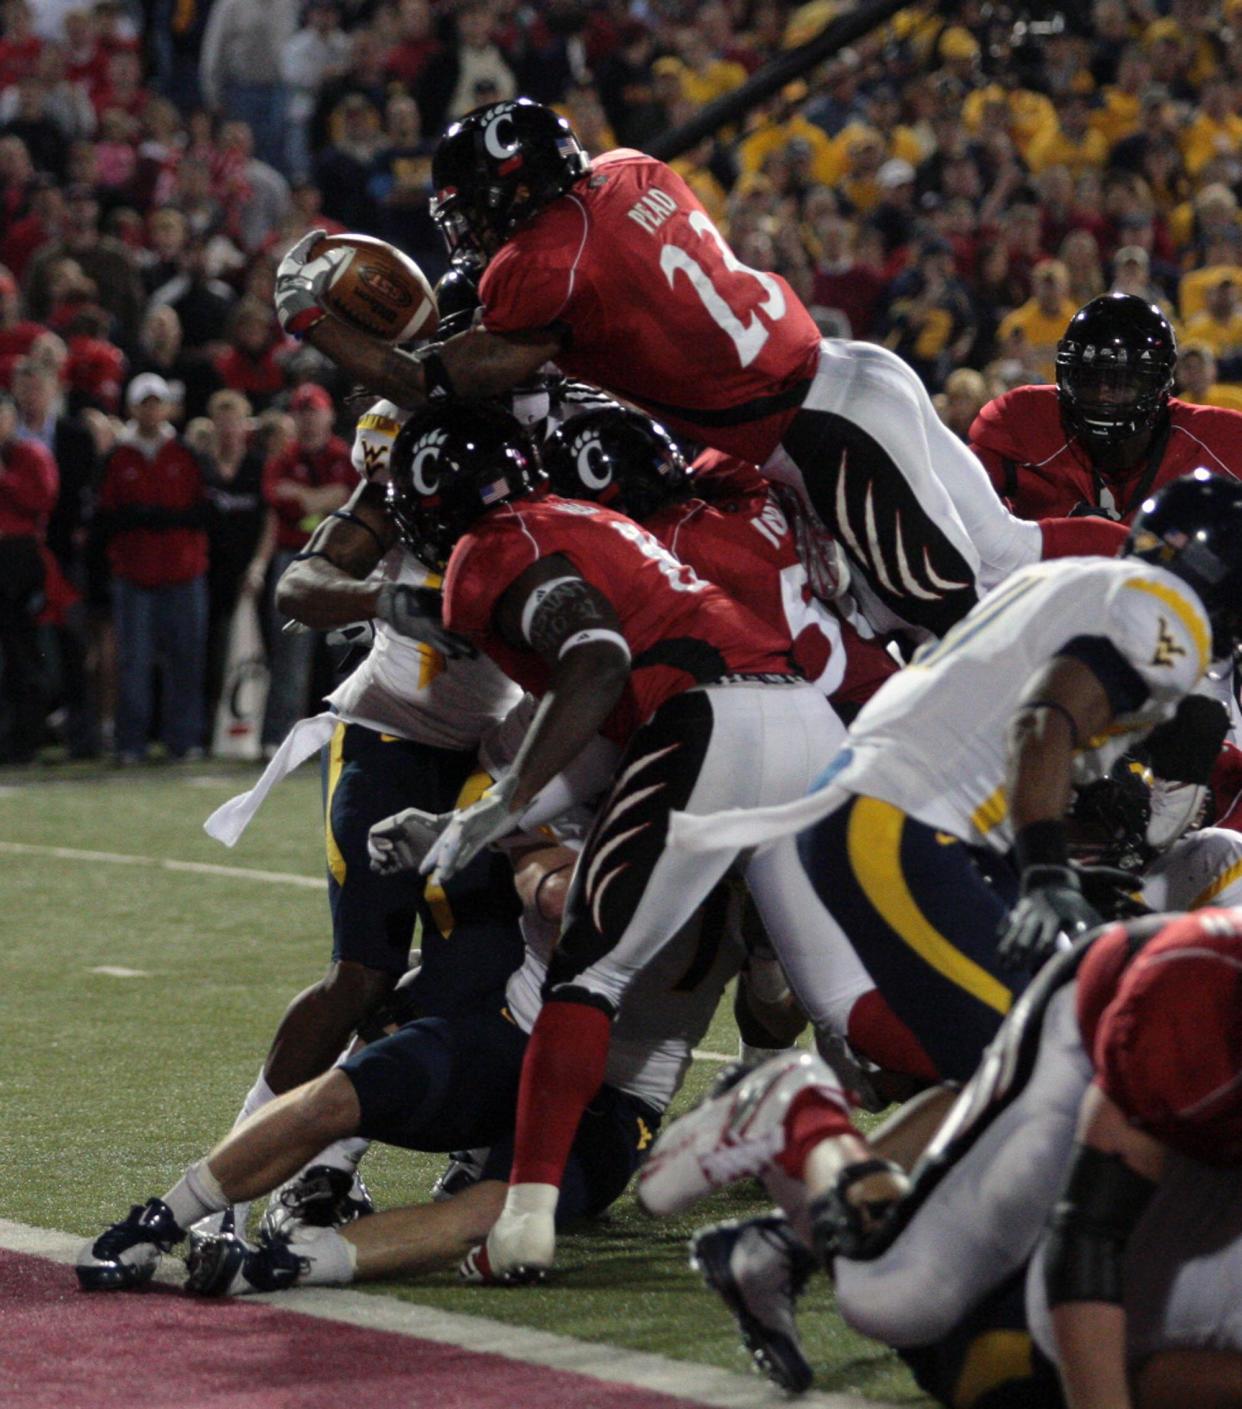 Isaiah Pead led UC to a win over West Virginia in 2009 with 175 rushing yards